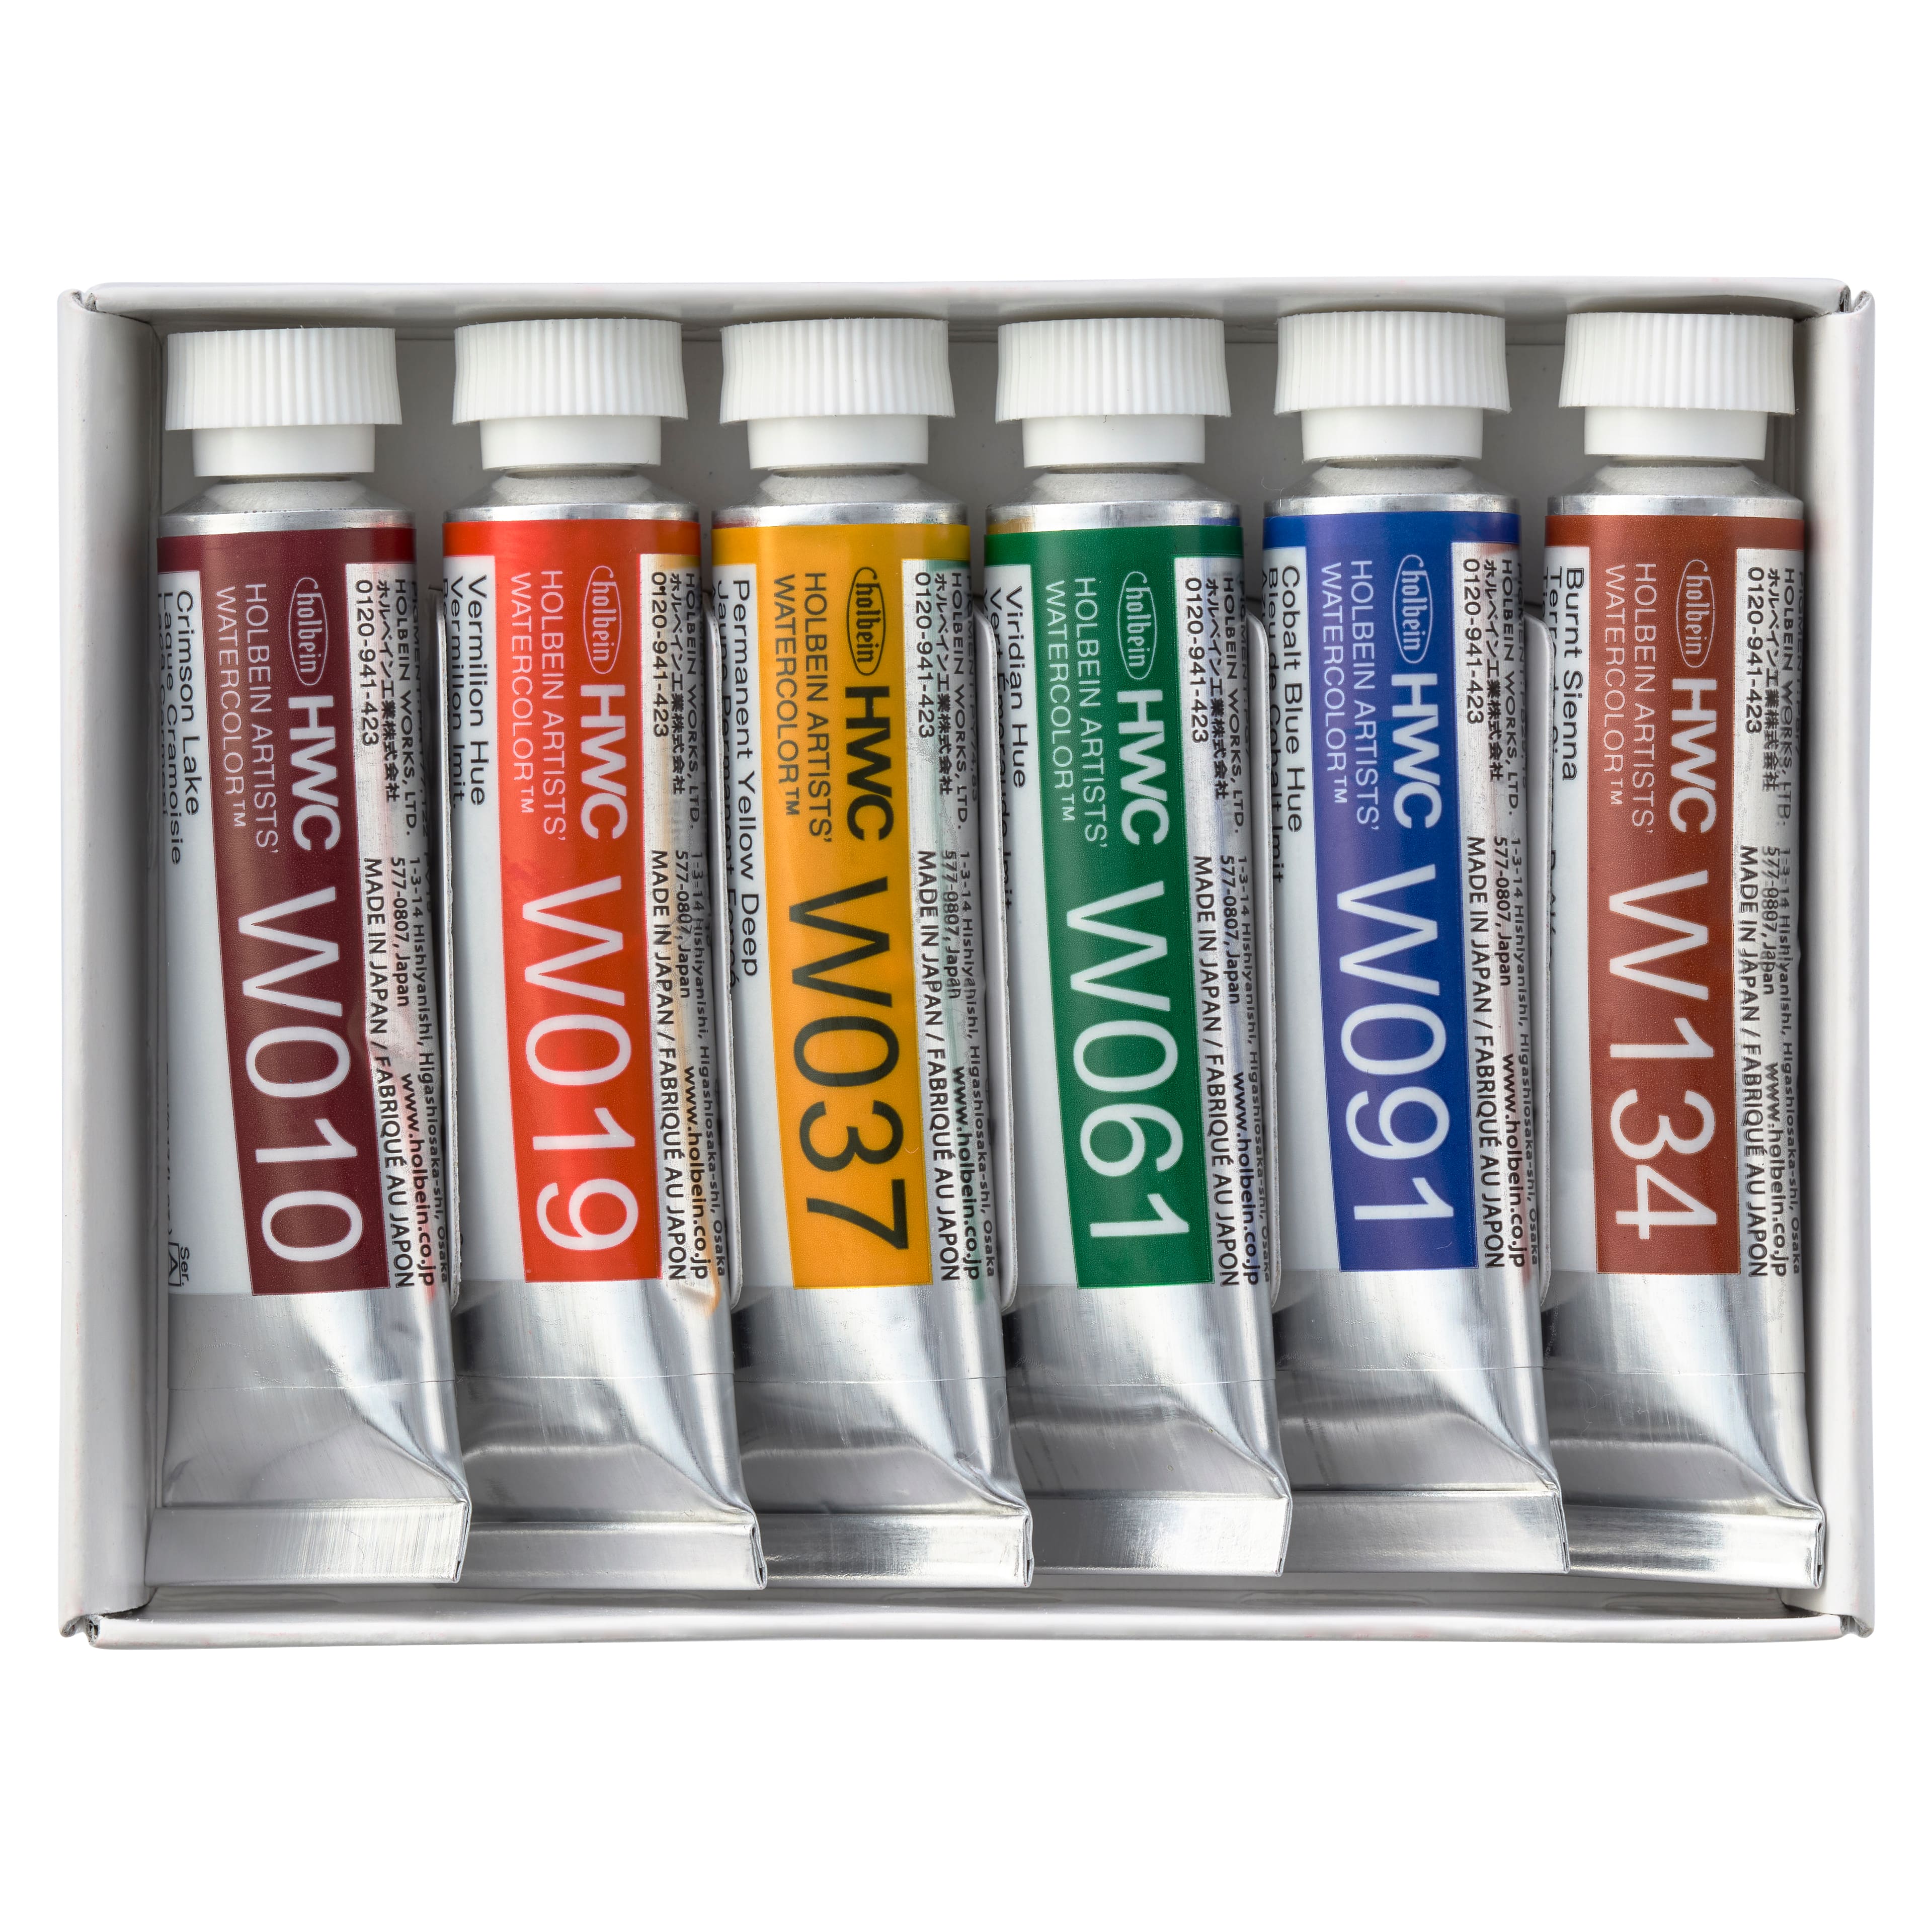 HWC Holbein Artists' Watercolor 5ml Tube Set - 8 Variation